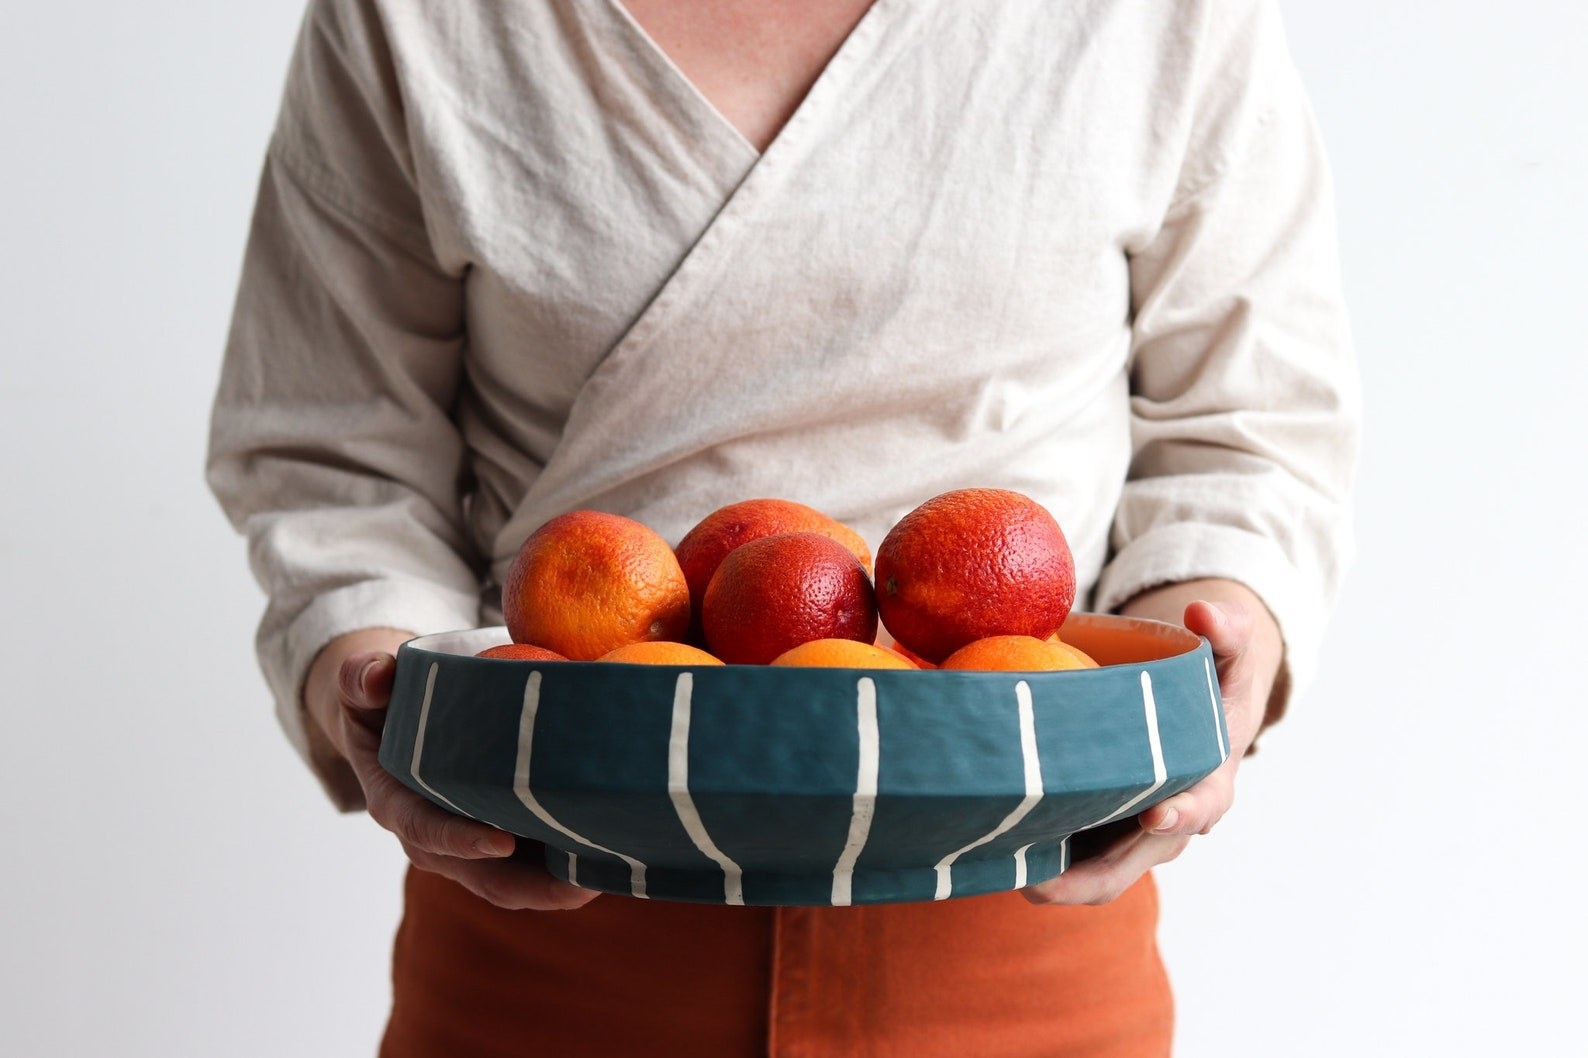 A woman holding a striped green and white serving bowl full of oranges